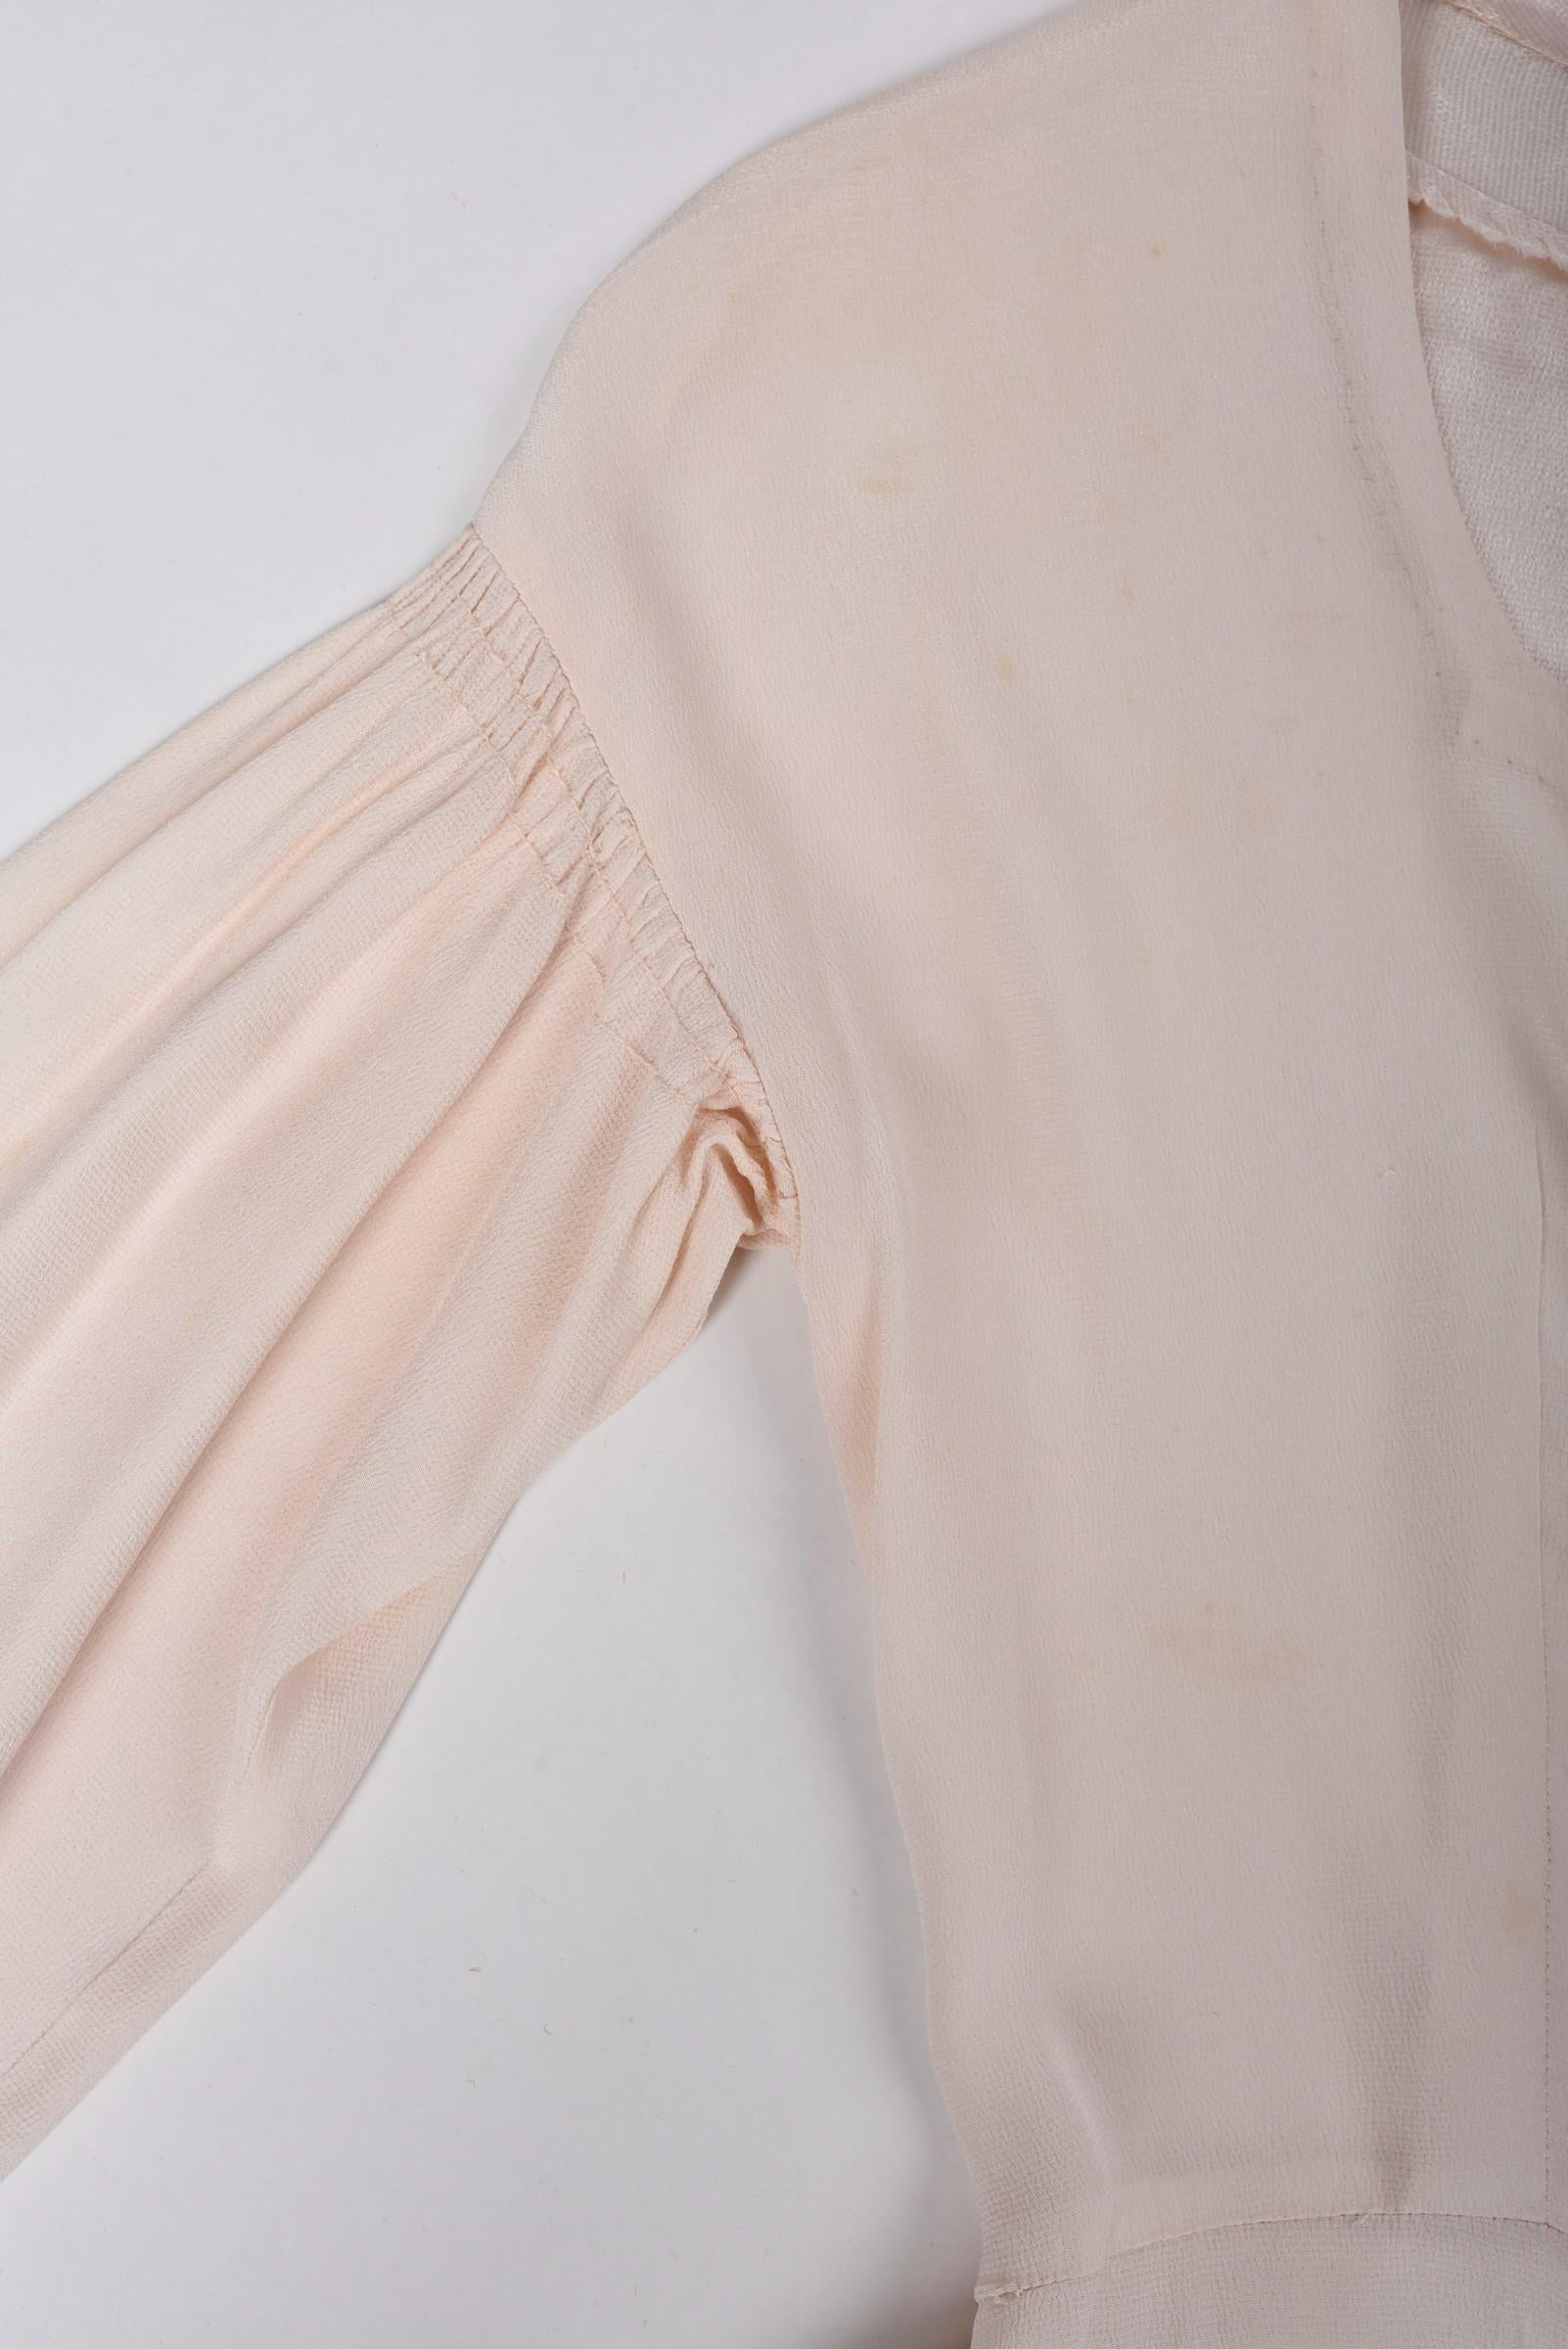 A French Powder Pink Crepe Satin Ceremonial Dress Circa 1940 For Sale 7